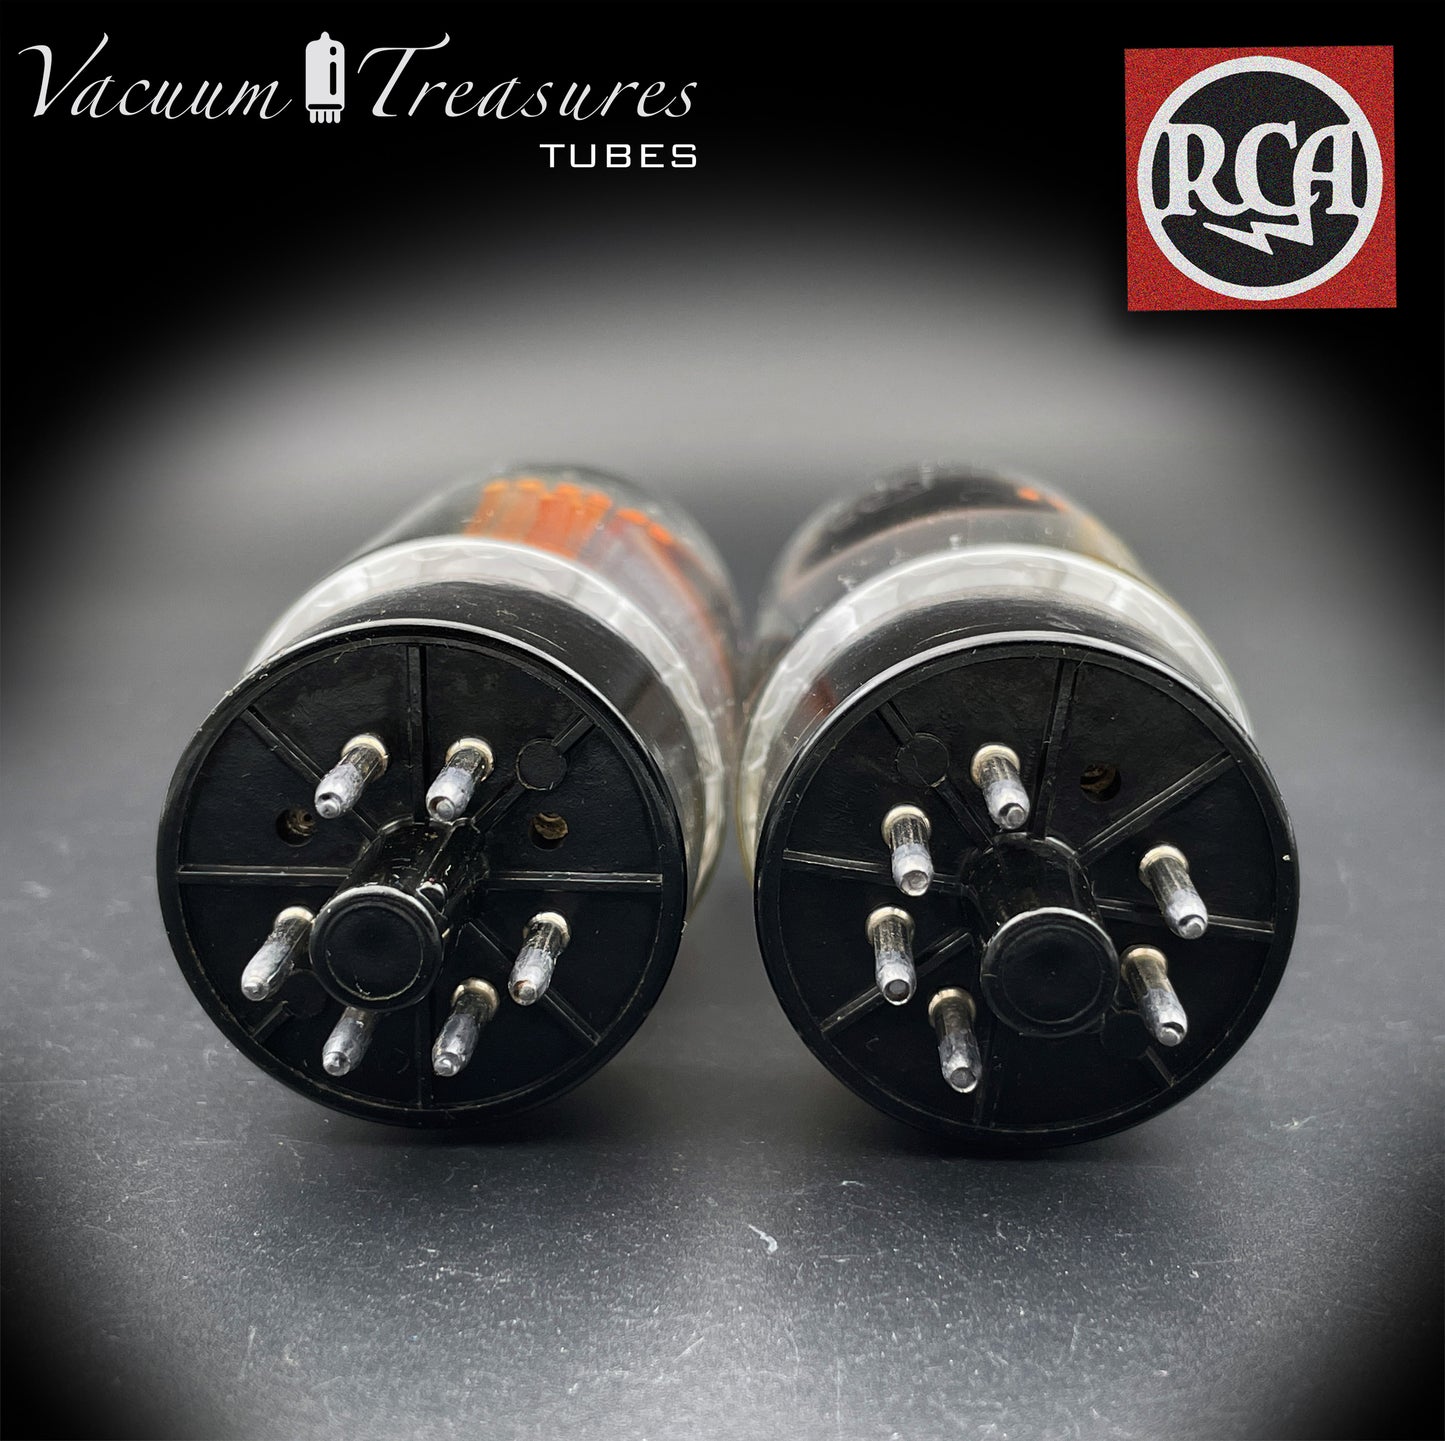 6L6GC RCA Black Plates Side OO Getter Matched Tubes Made in USA